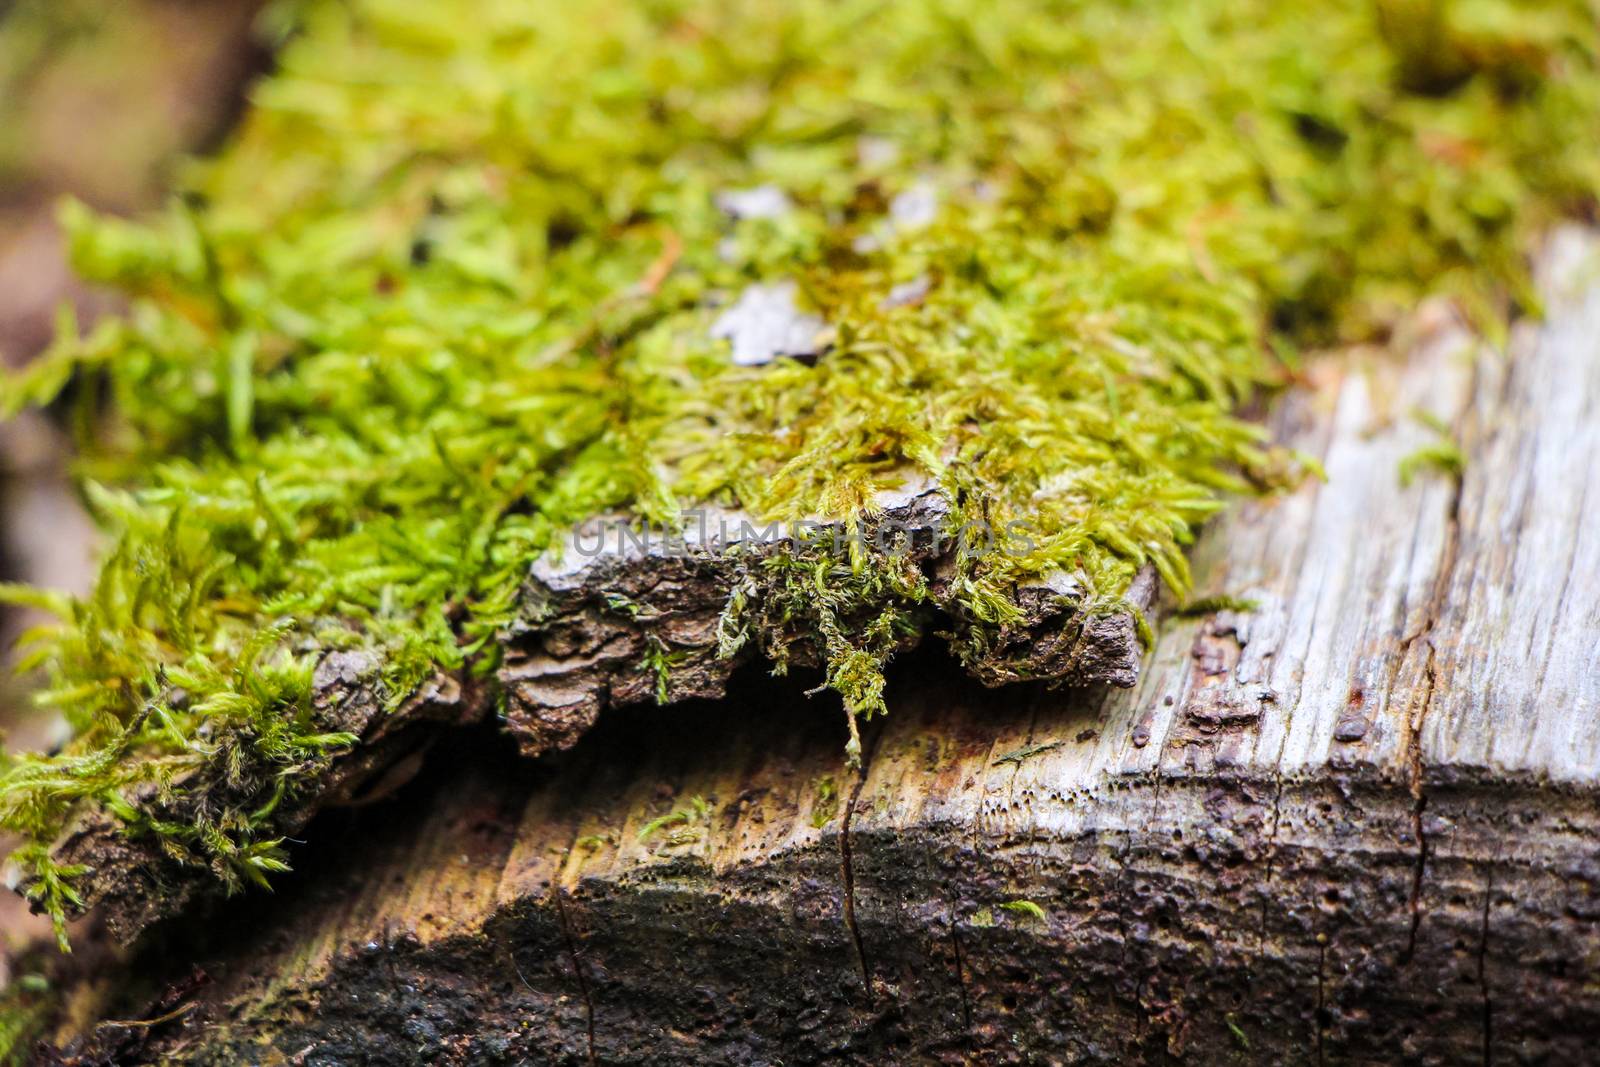 Green and yellow moss on tree trunk in forest in spring.